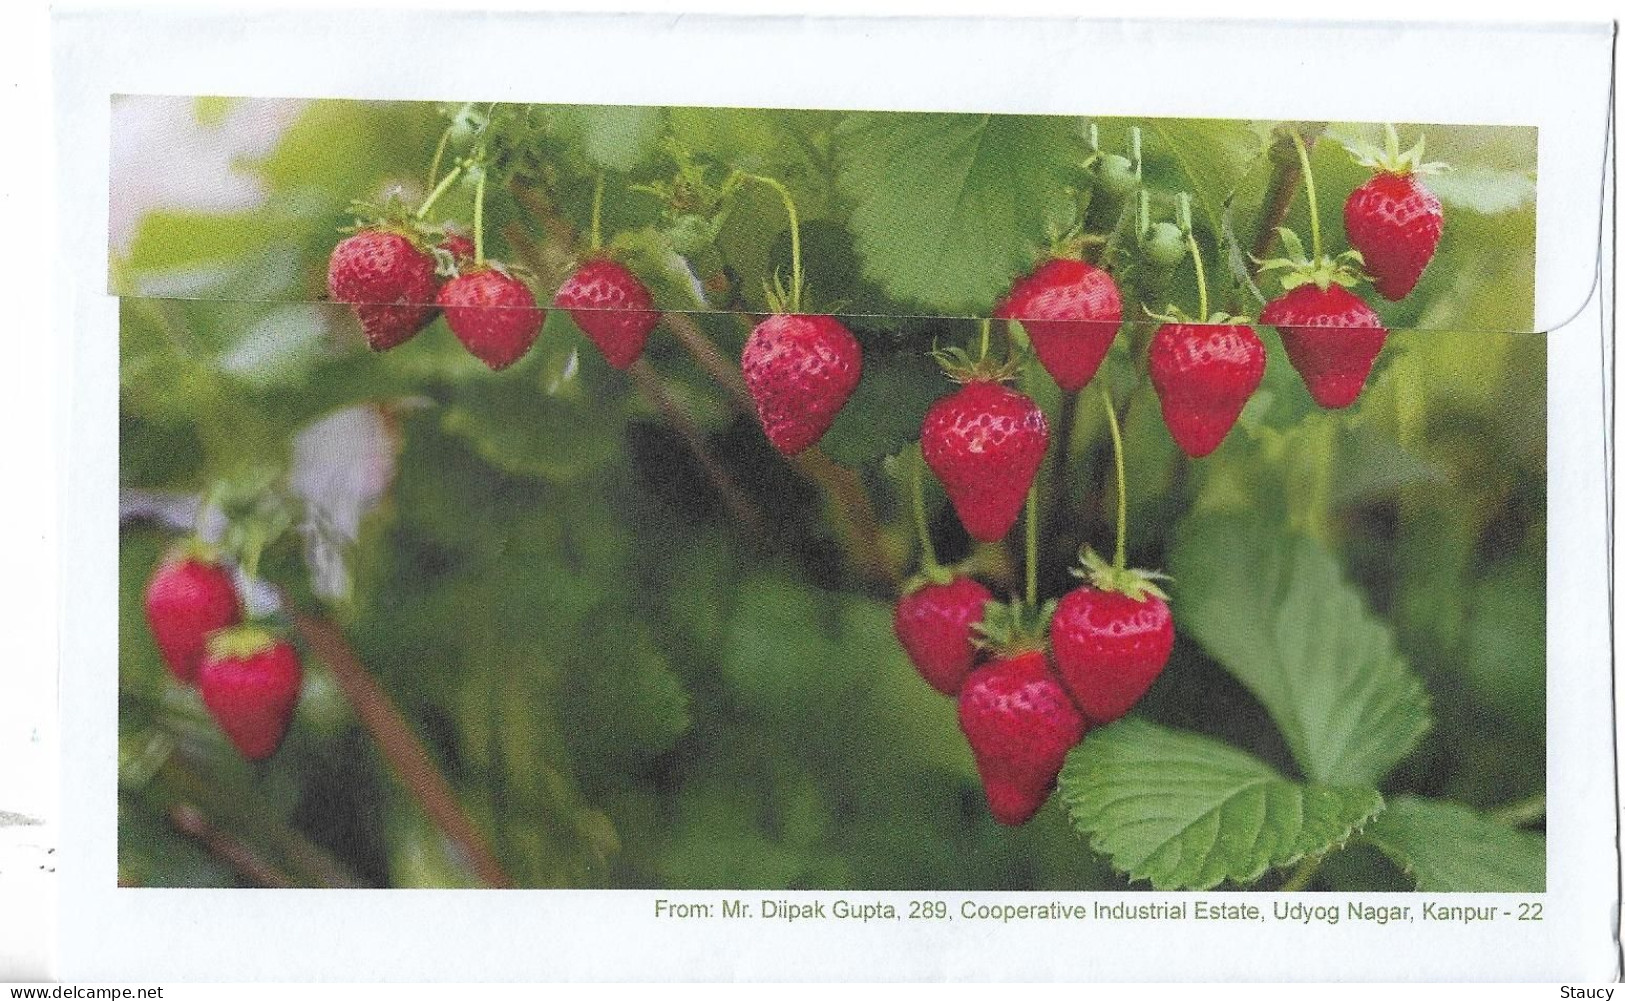 India 2023 GI Geological Indications: Agricultural Goods- MAHABALESHWAR STRAWBERRY, Special FDC Kanpur Cancelled As Scan - Agriculture